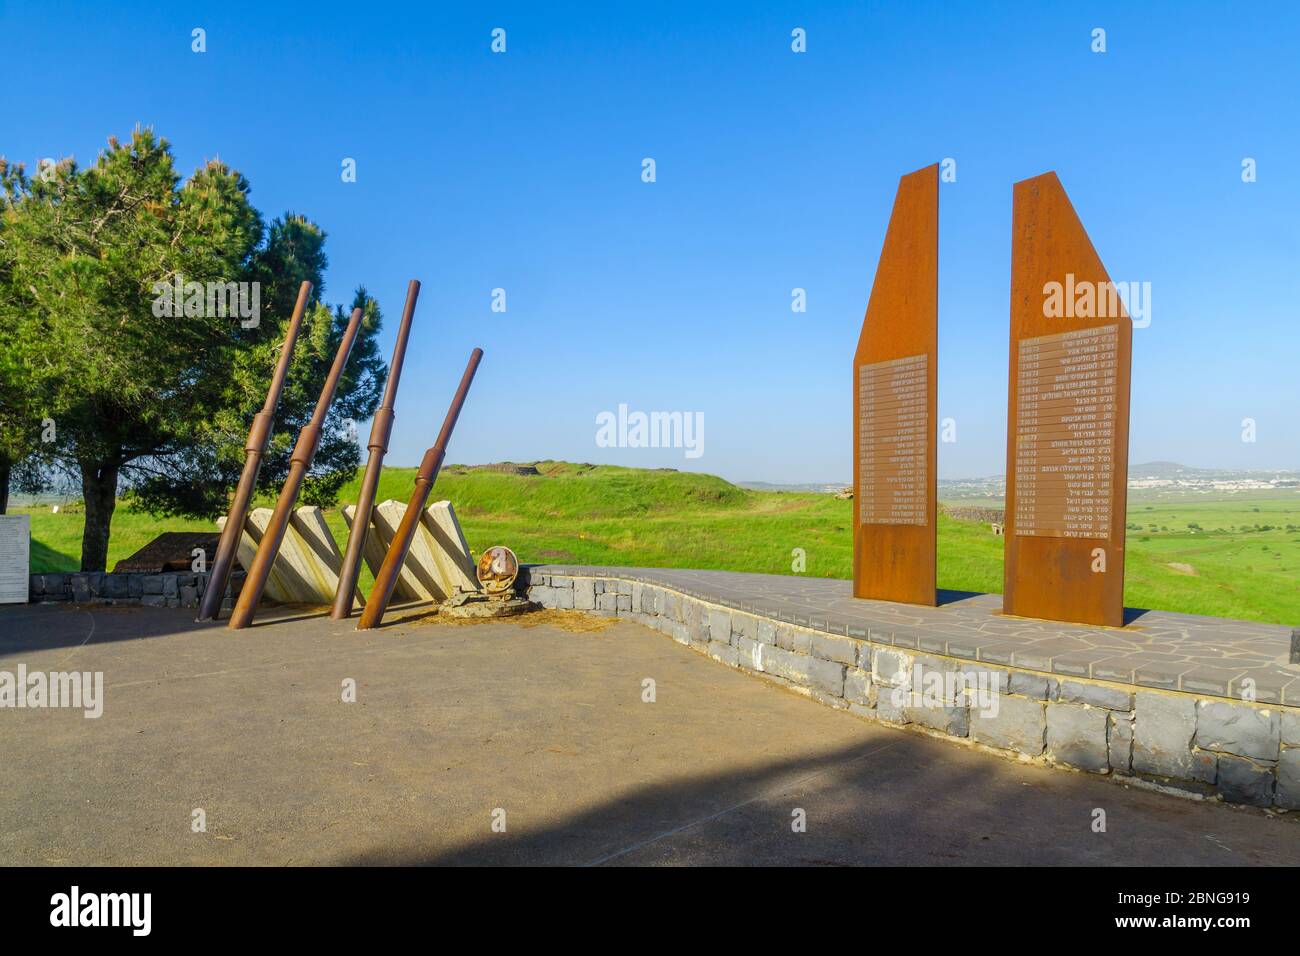 El-Rum, Israel - May 12, 2020: View of the Oz 77 Memorial (Valley of Tears) for Yom Kippur war (1973) in the Golan Heights. Northern Israel Stock Photo